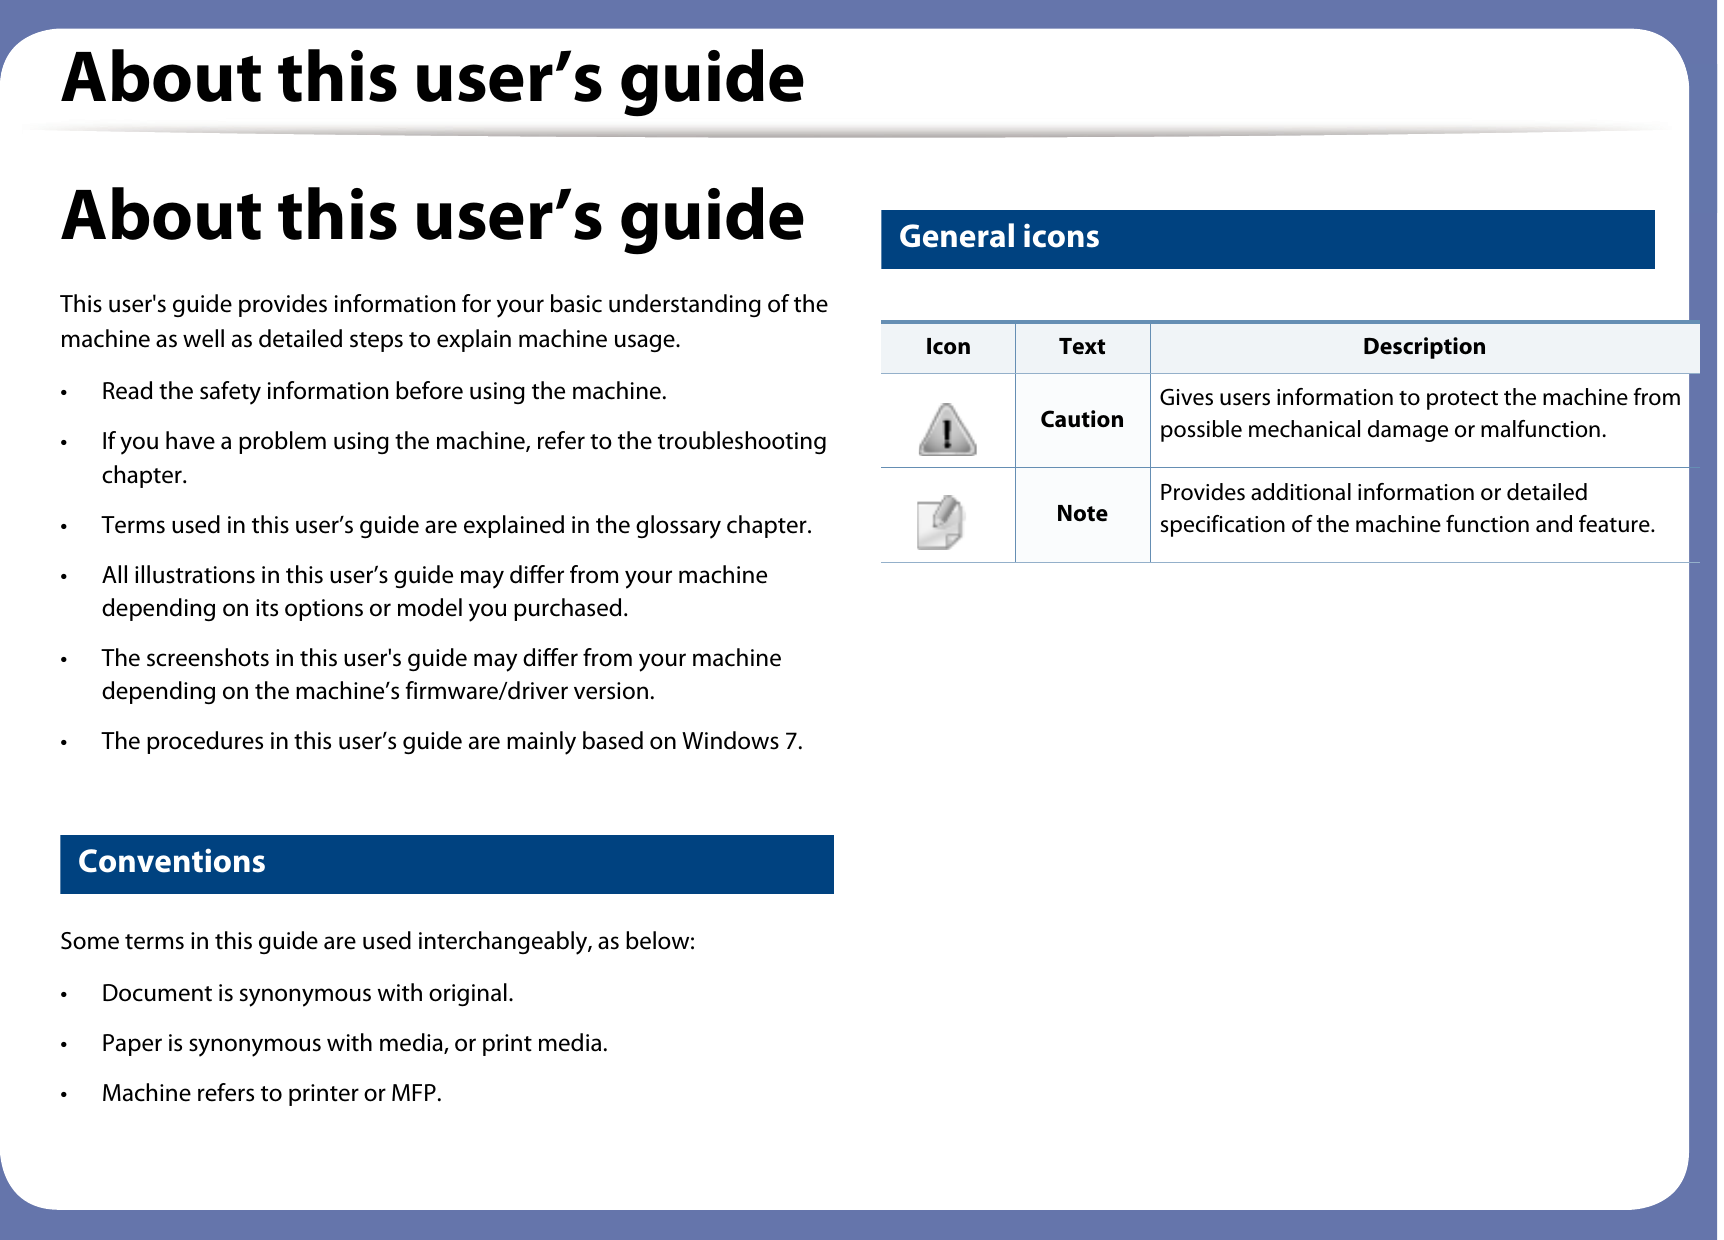 About this user’s guideAbout this user’s guideThis user&apos;s guide provides information for your basic understanding of the machine as well as detailed steps to explain machine usage.• Read the safety information before using the machine.• If you have a problem using the machine, refer to the troubleshooting chapter.• Terms used in this user’s guide are explained in the glossary chapter.• All illustrations in this user’s guide may differ from your machine depending on its options or model you purchased.• The screenshots in this user&apos;s guide may differ from your machine depending on the machine’s firmware/driver version.• The procedures in this user’s guide are mainly based on Windows 7.1 ConventionsSome terms in this guide are used interchangeably, as below:• Document is synonymous with original.• Paper is synonymous with media, or print media.• Machine refers to printer or MFP.2 General iconsIcon Text DescriptionCaution Gives users information to protect the machine from possible mechanical damage or malfunction.Note Provides additional information or detailed specification of the machine function and feature.